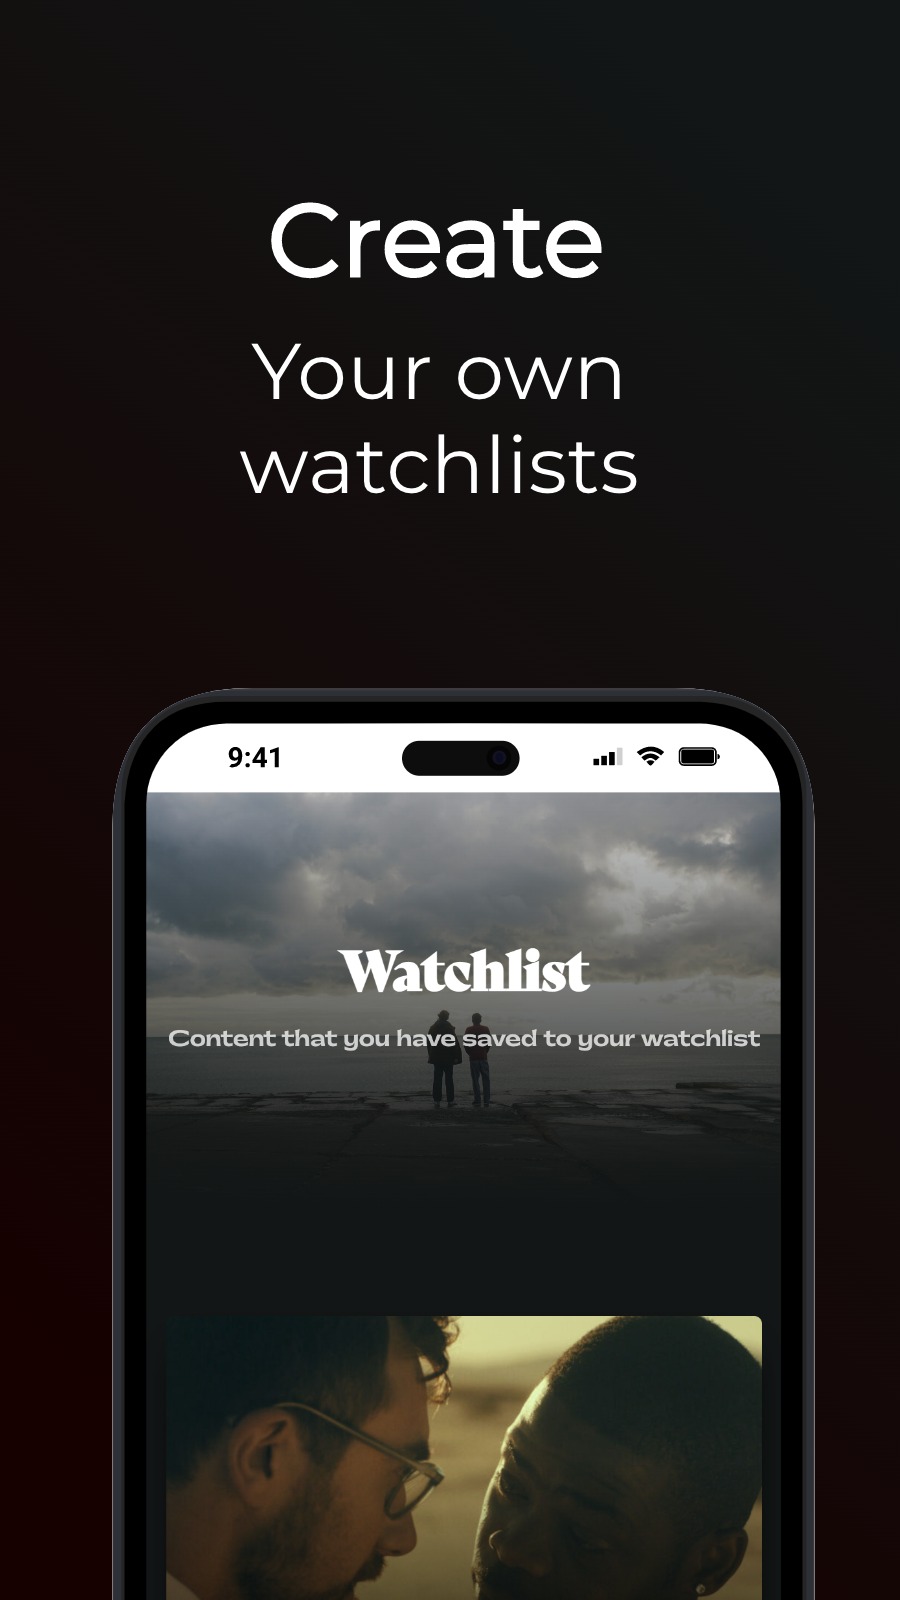 Create - Your own watchlists